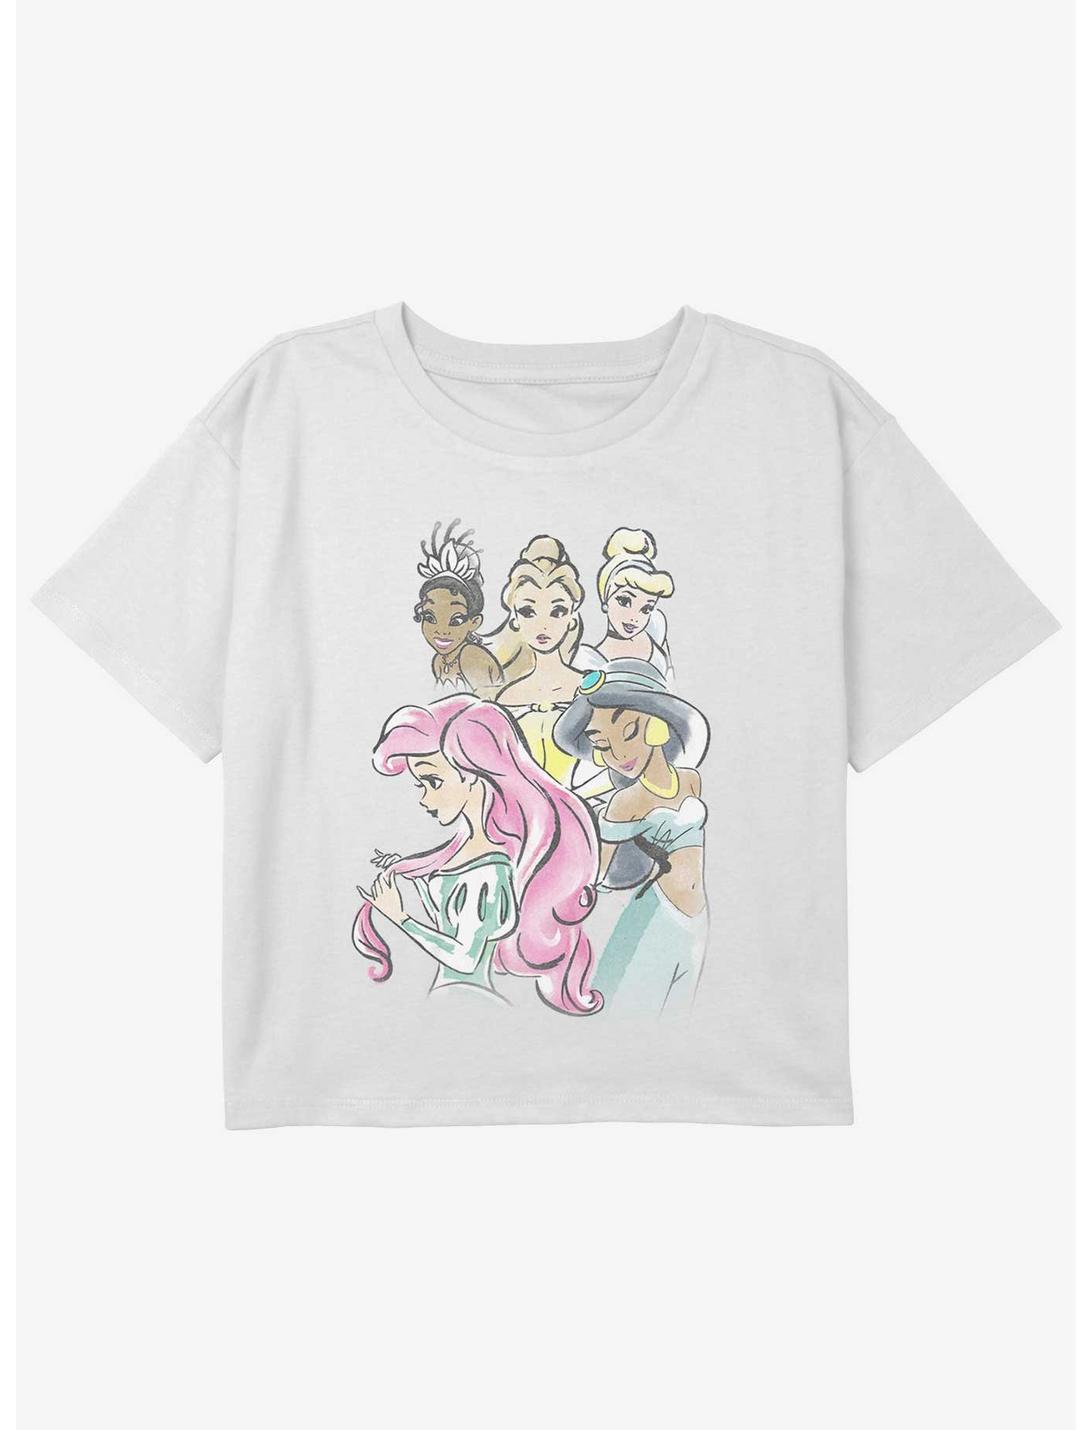 Disney The Princess and the Frog Watercolor Princesses Girls Youth Crop T-Shirt, WHITE, hi-res